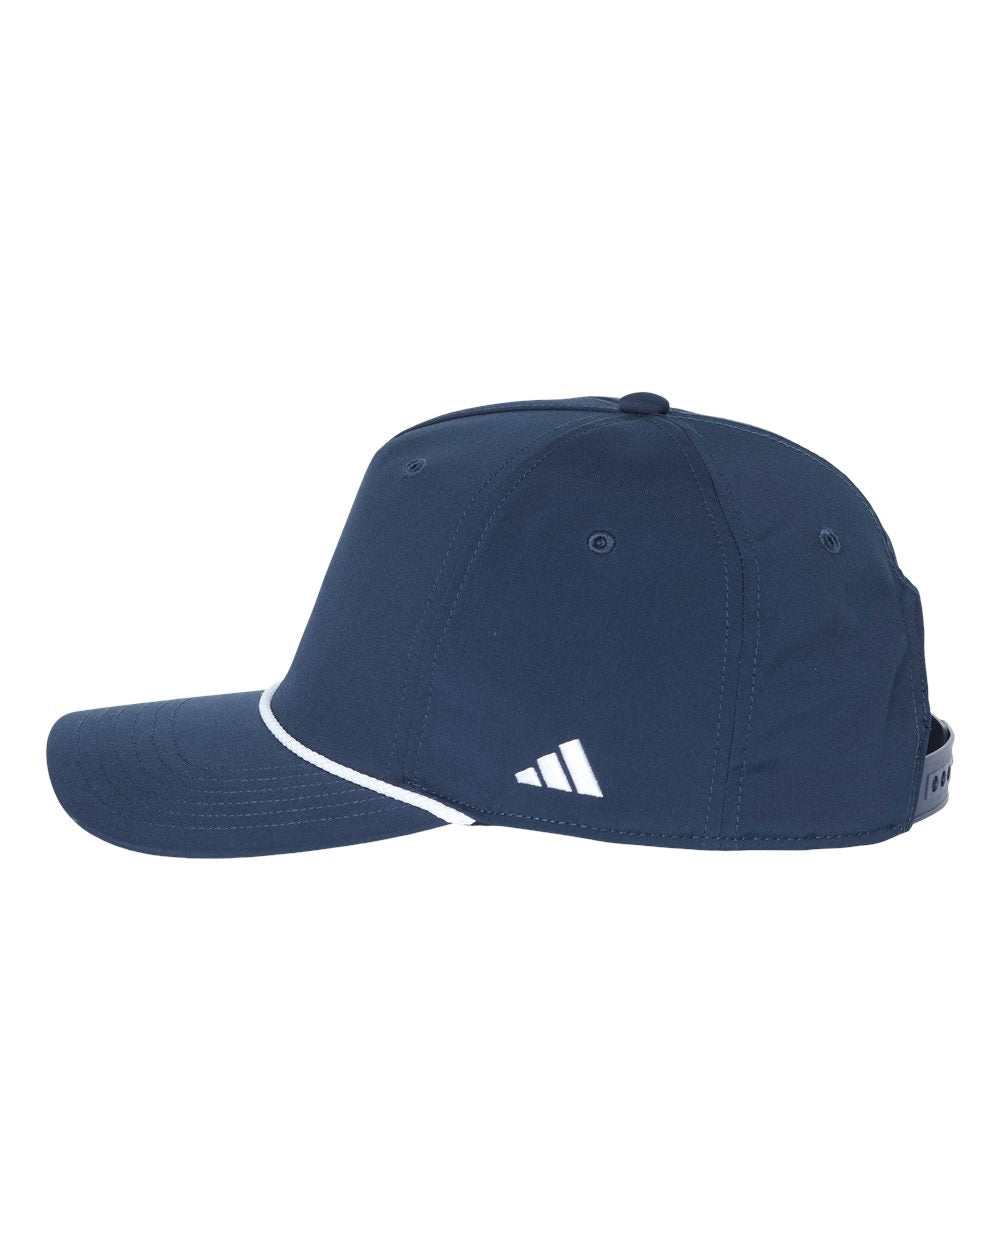 Adidas - Sustainable Rope Cap - A671S